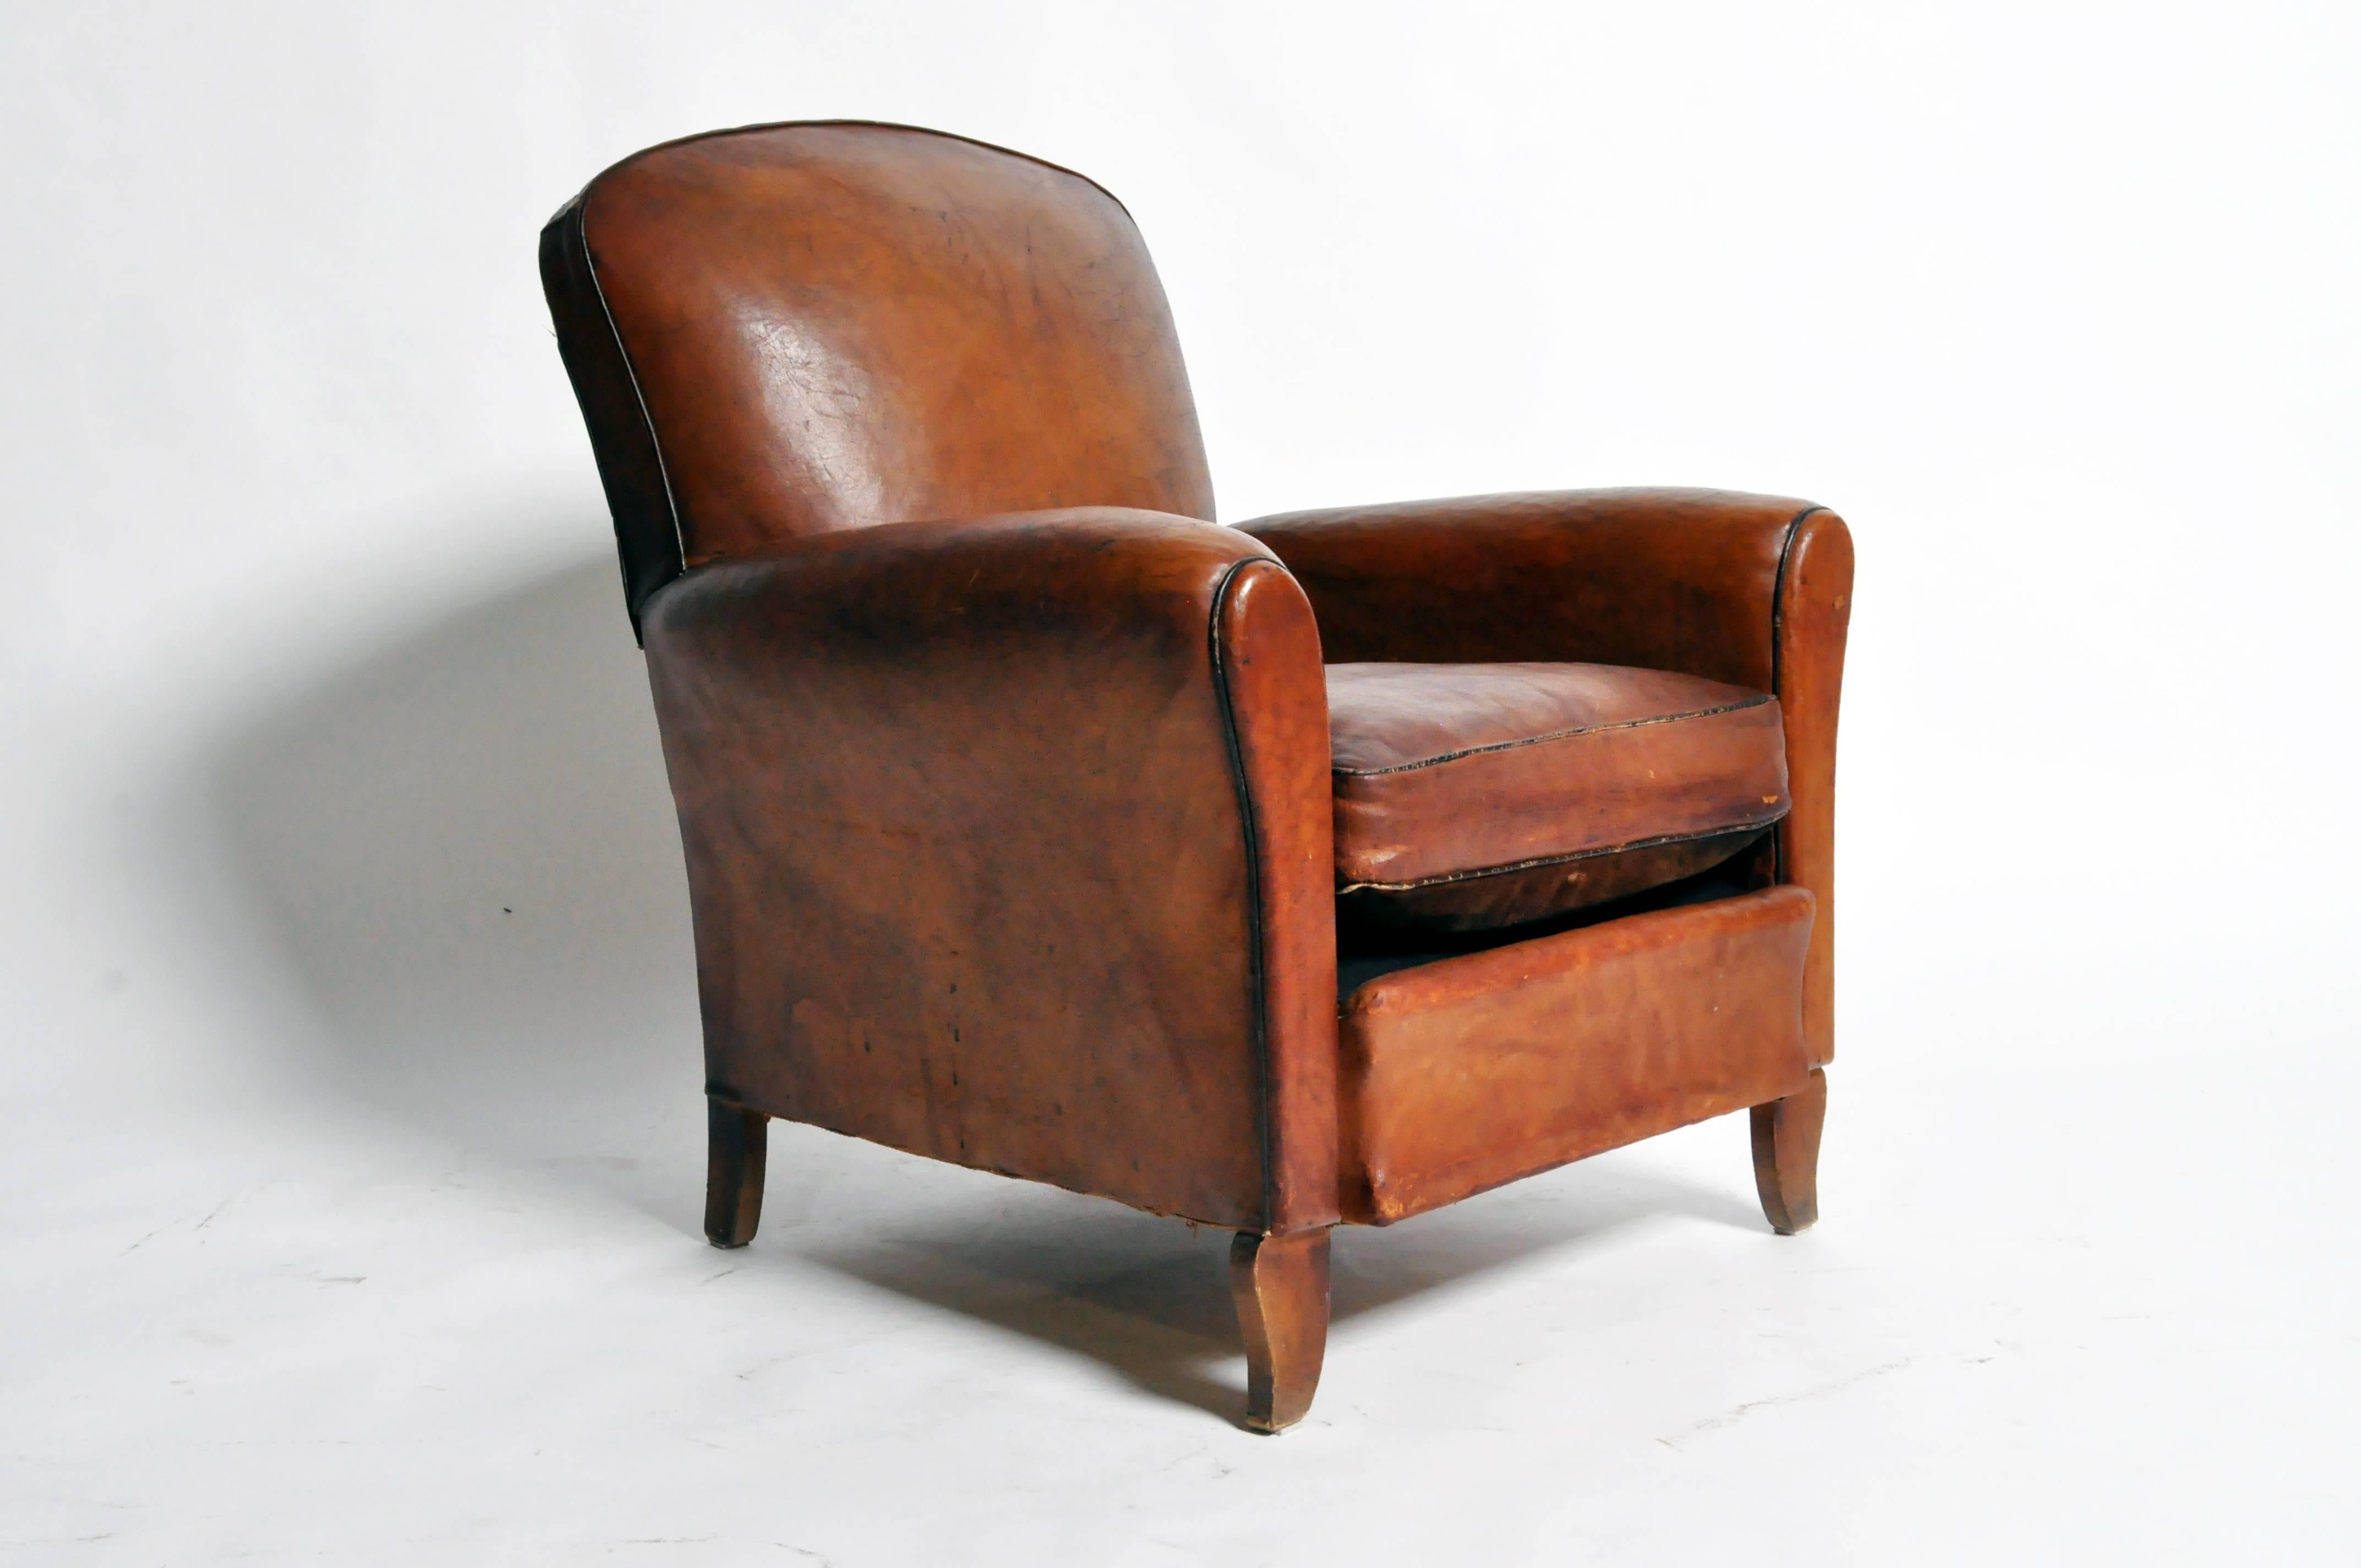 This handsome Art Deco leather chair is from Paris, France and was made from leather, c. 1940. The chair features its original leather, piping, and a beautifully aged patina. 

Additional dimensions: 18" Seat Width, 19" Seat Depth,